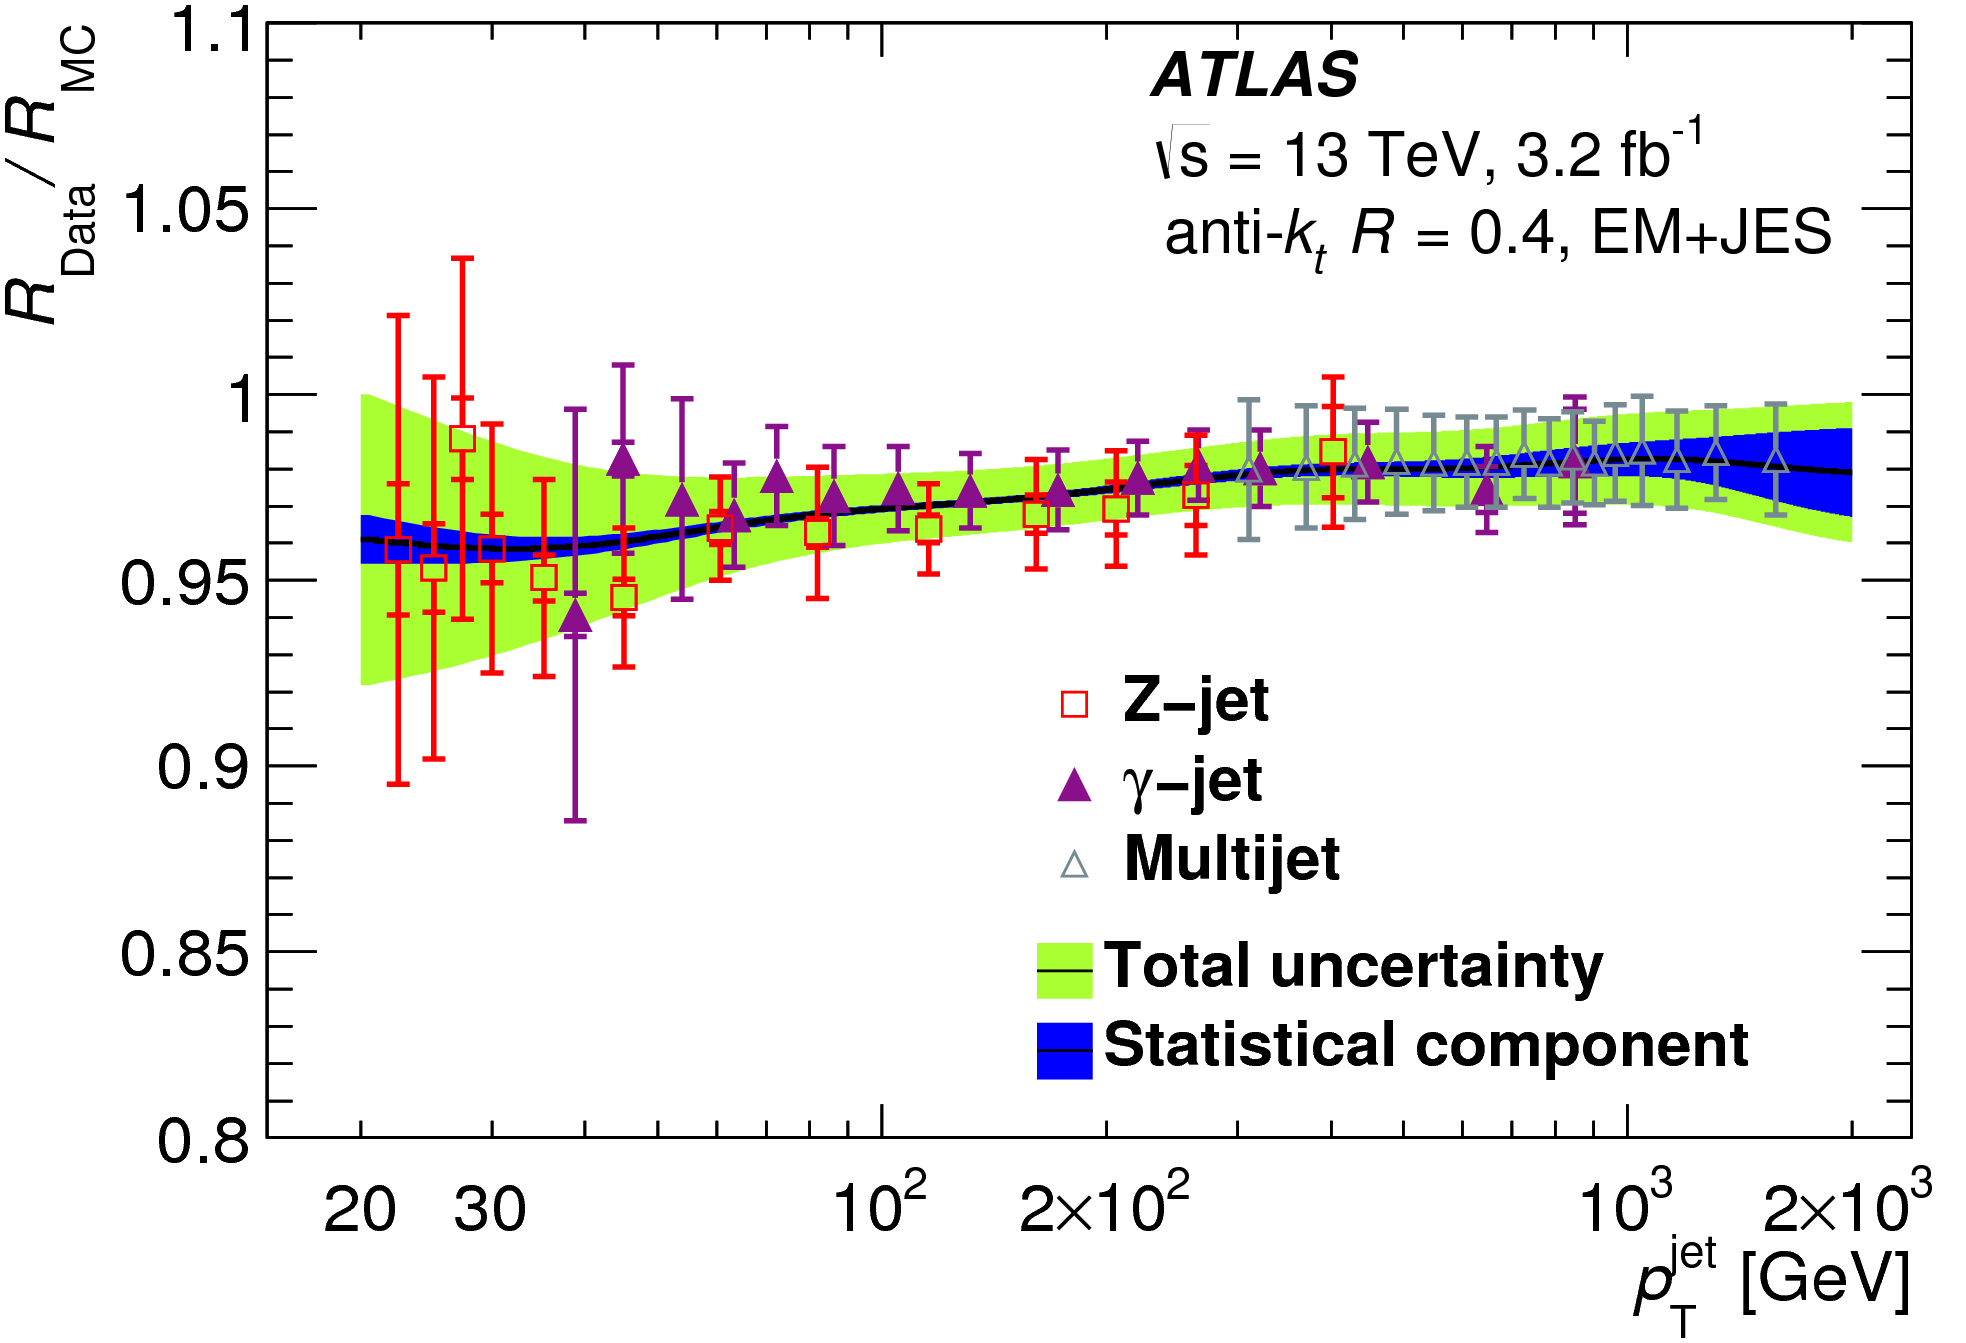 Jet energy scale measurements and their systematic uncertainties in proton-proton collisions at sqrt(s)=13 TeV with the ATLAS detector